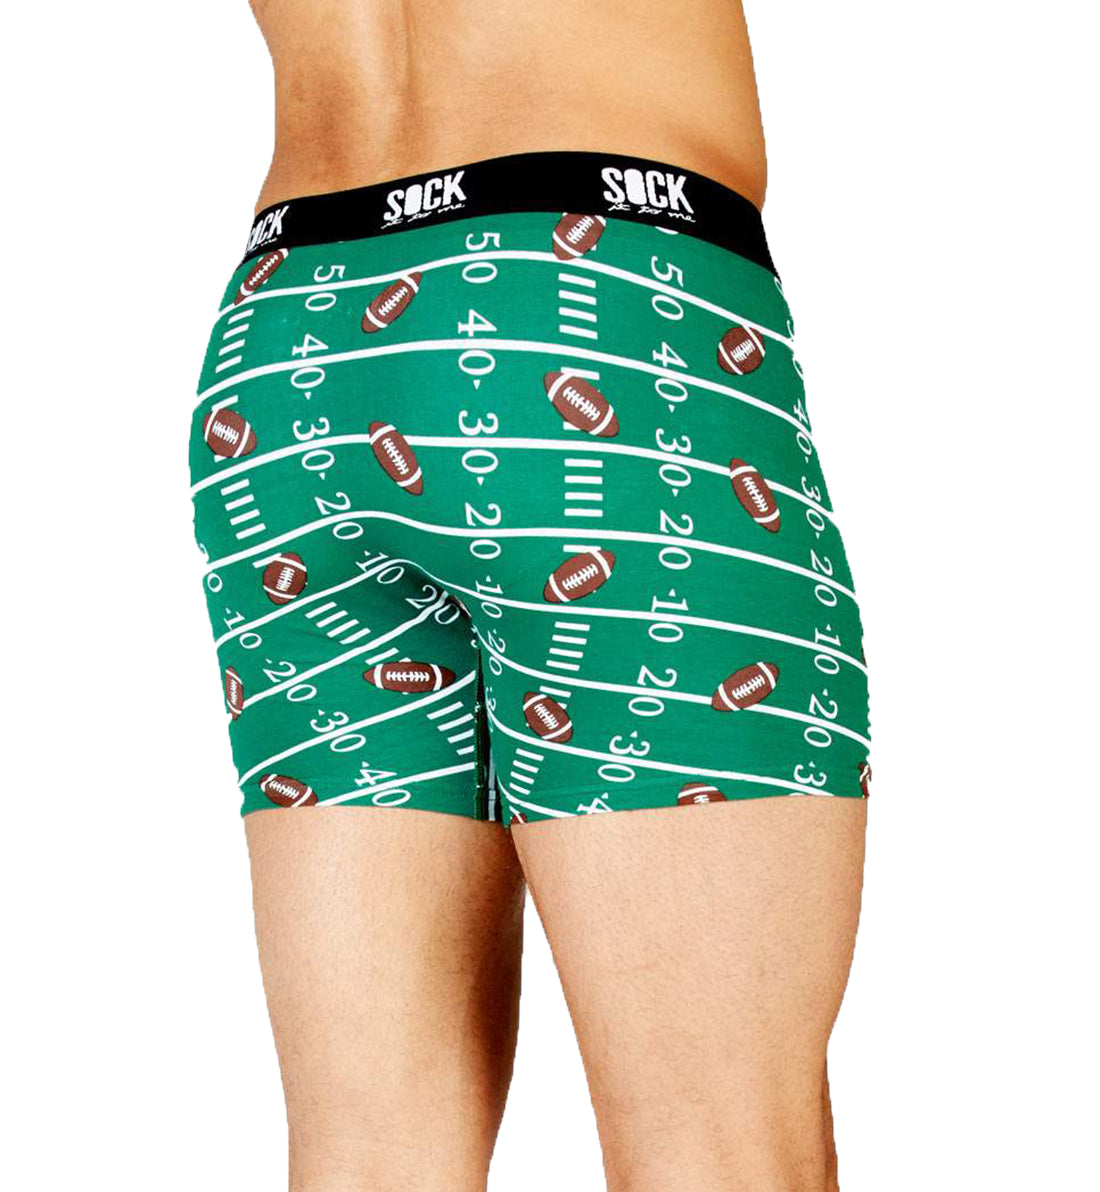 SOCK it to me Men&#39;s Boxer Brief (umb036),Small,Touchdown - Touchdown,Small